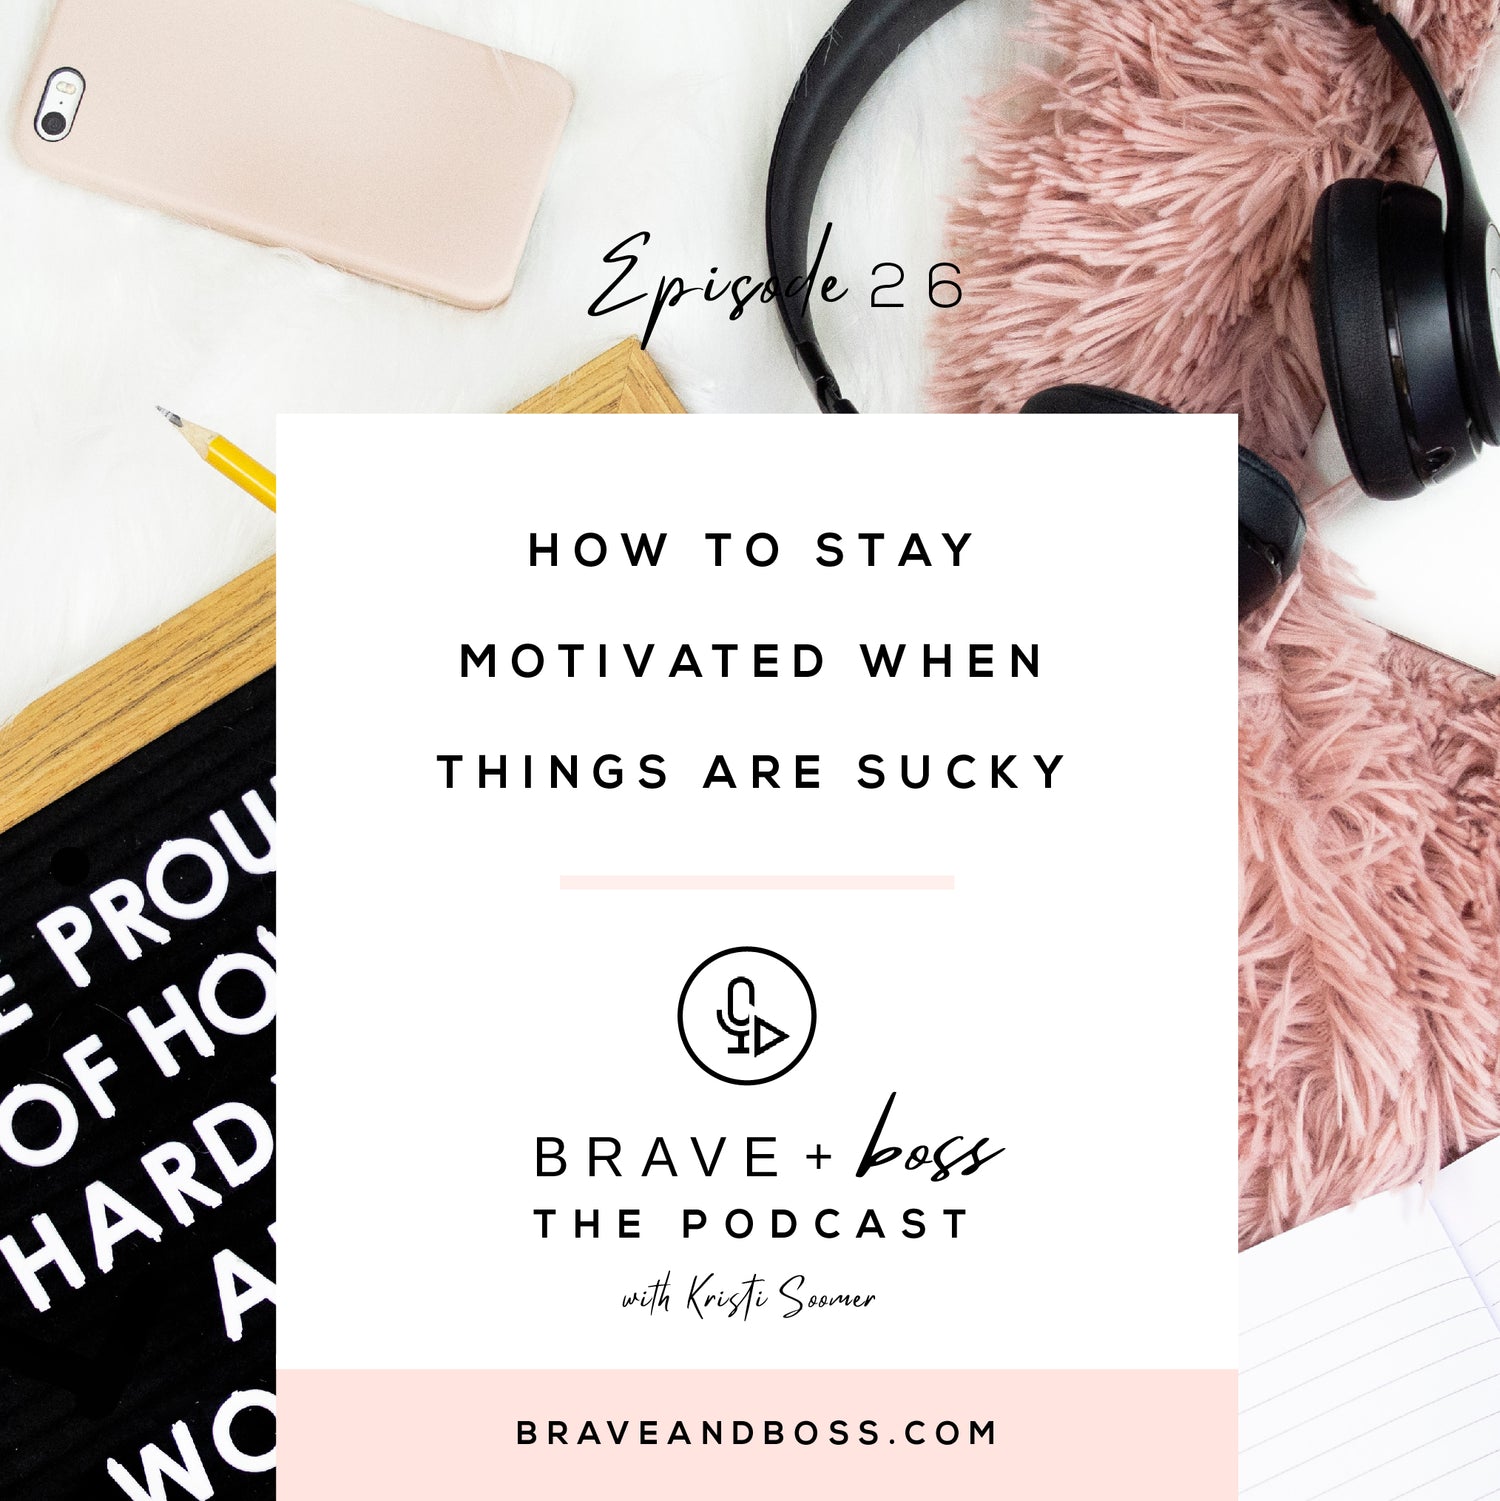 How to Stay Motivated when Things are Sucky